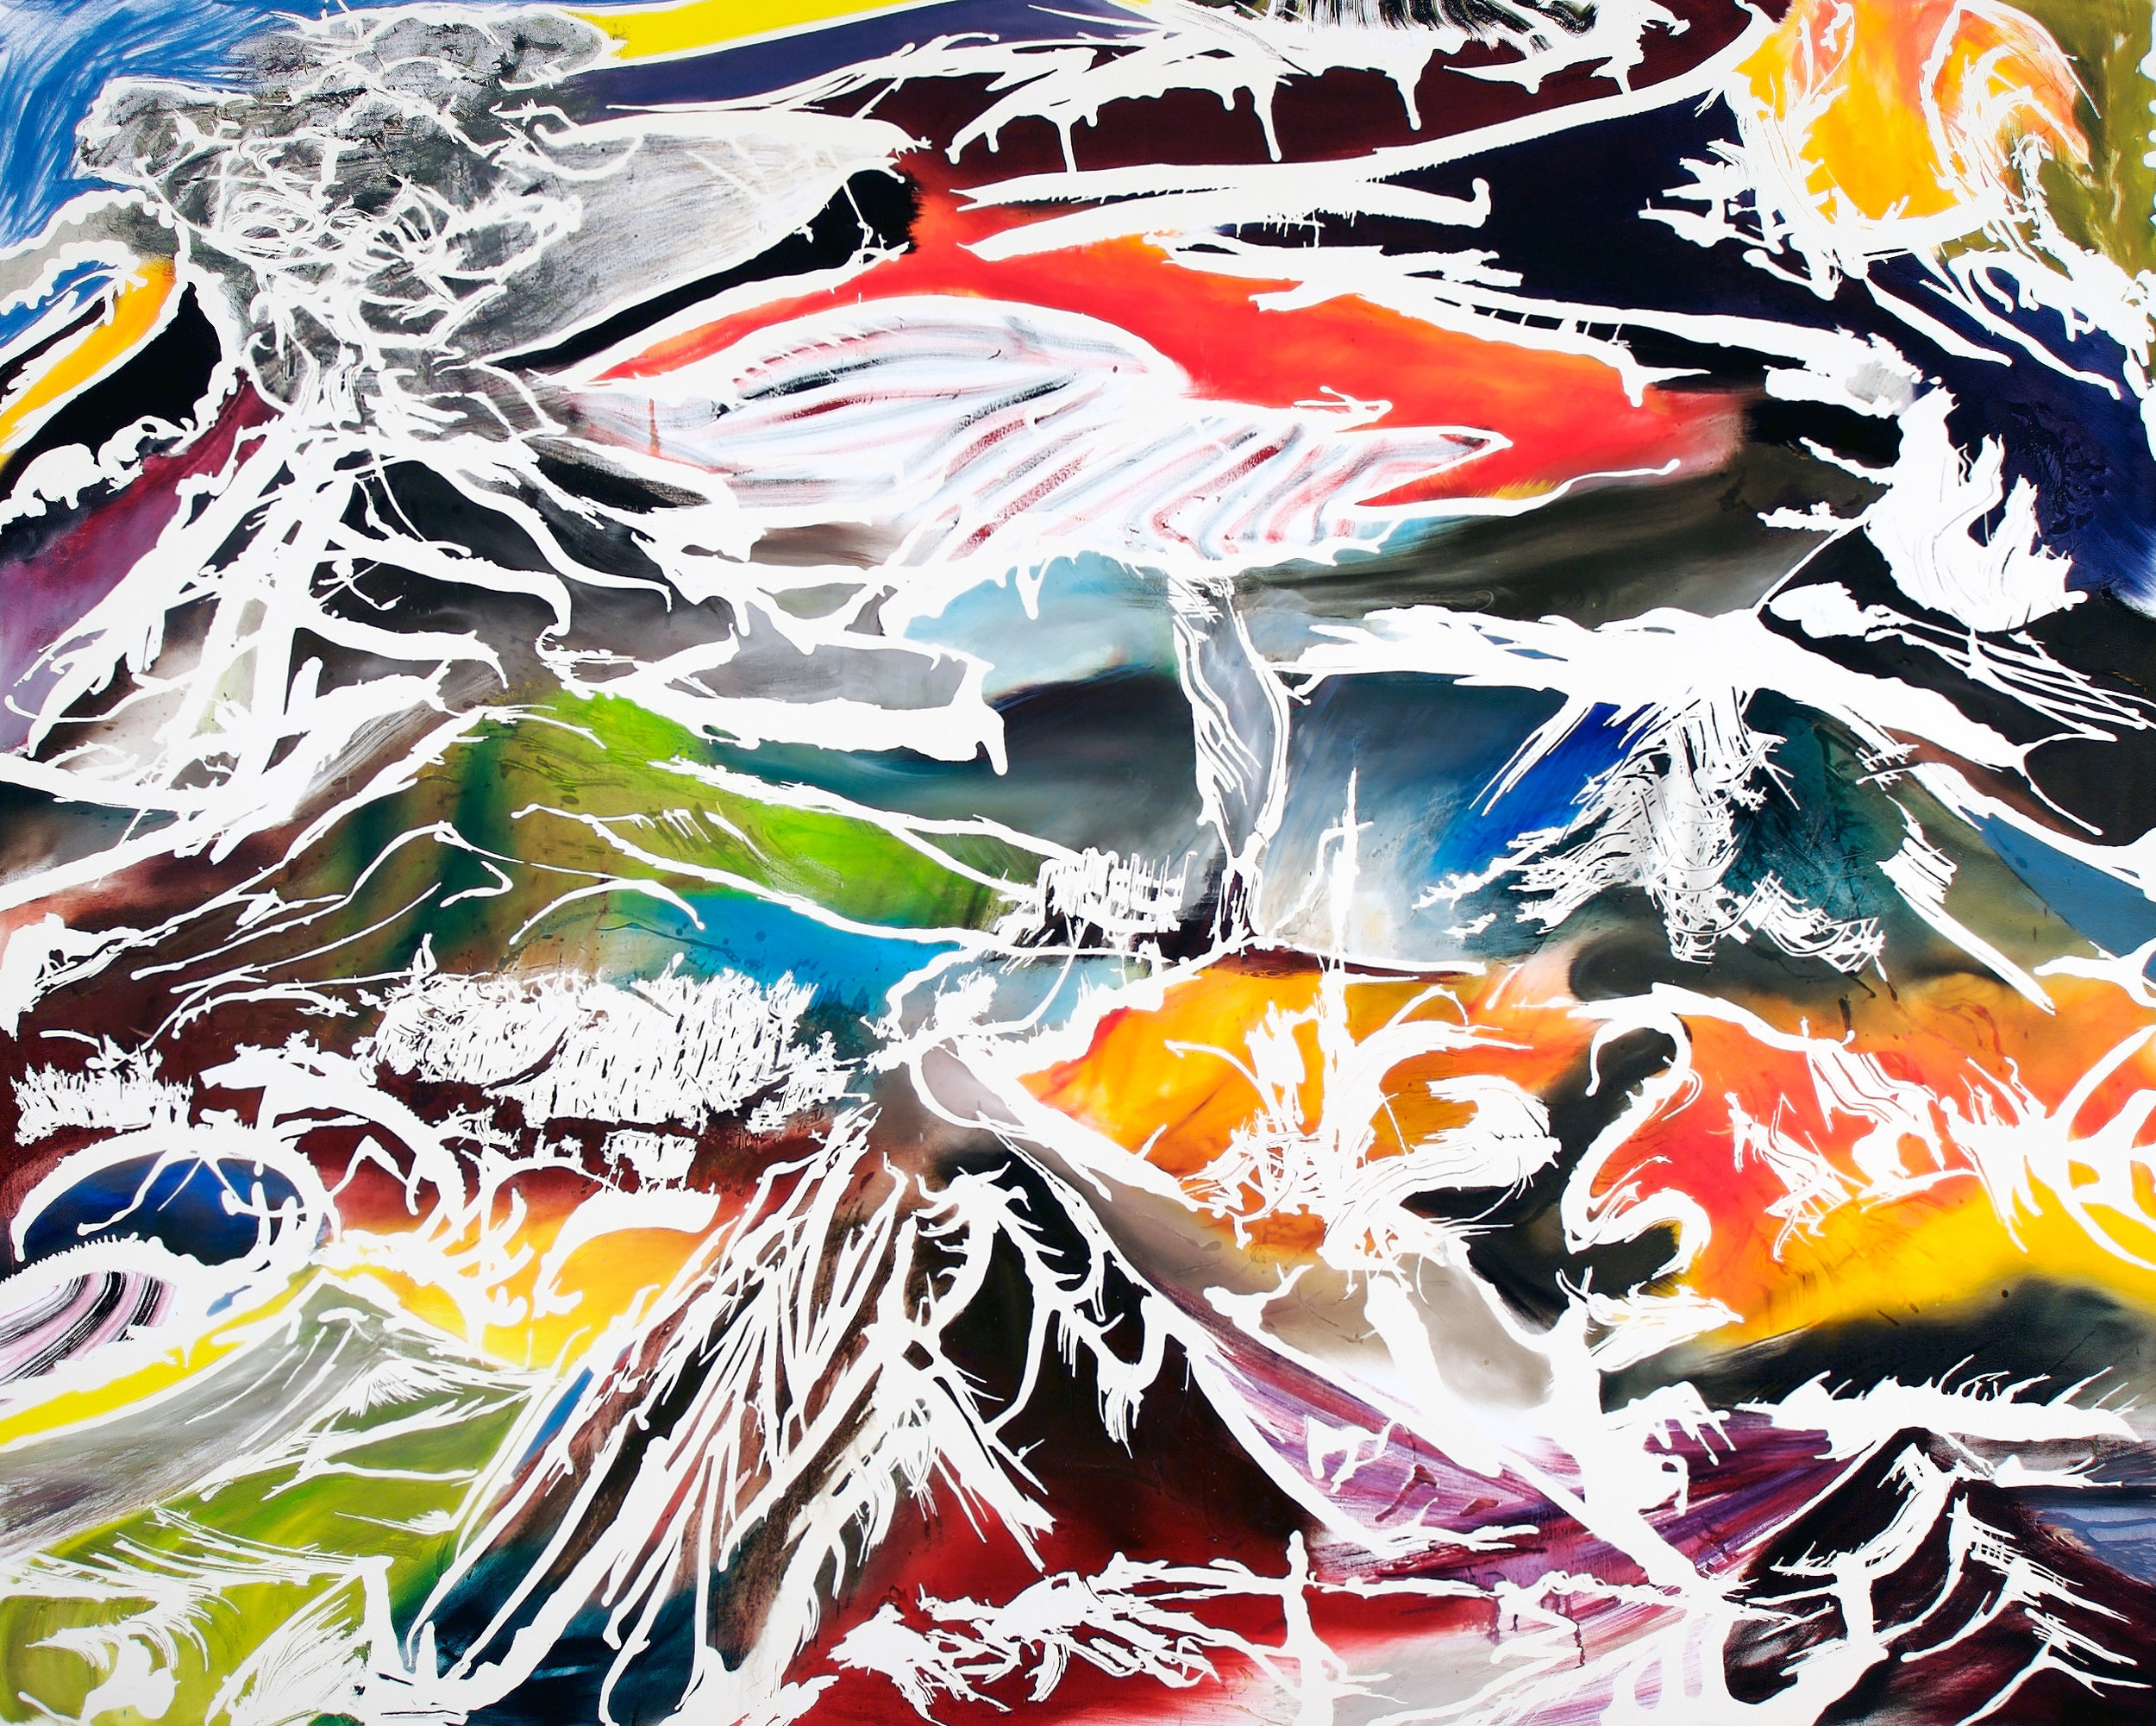   Earth’s Most Famous Volcanoes 2 , 2007, oil on canvas, 96 x 120 inches 